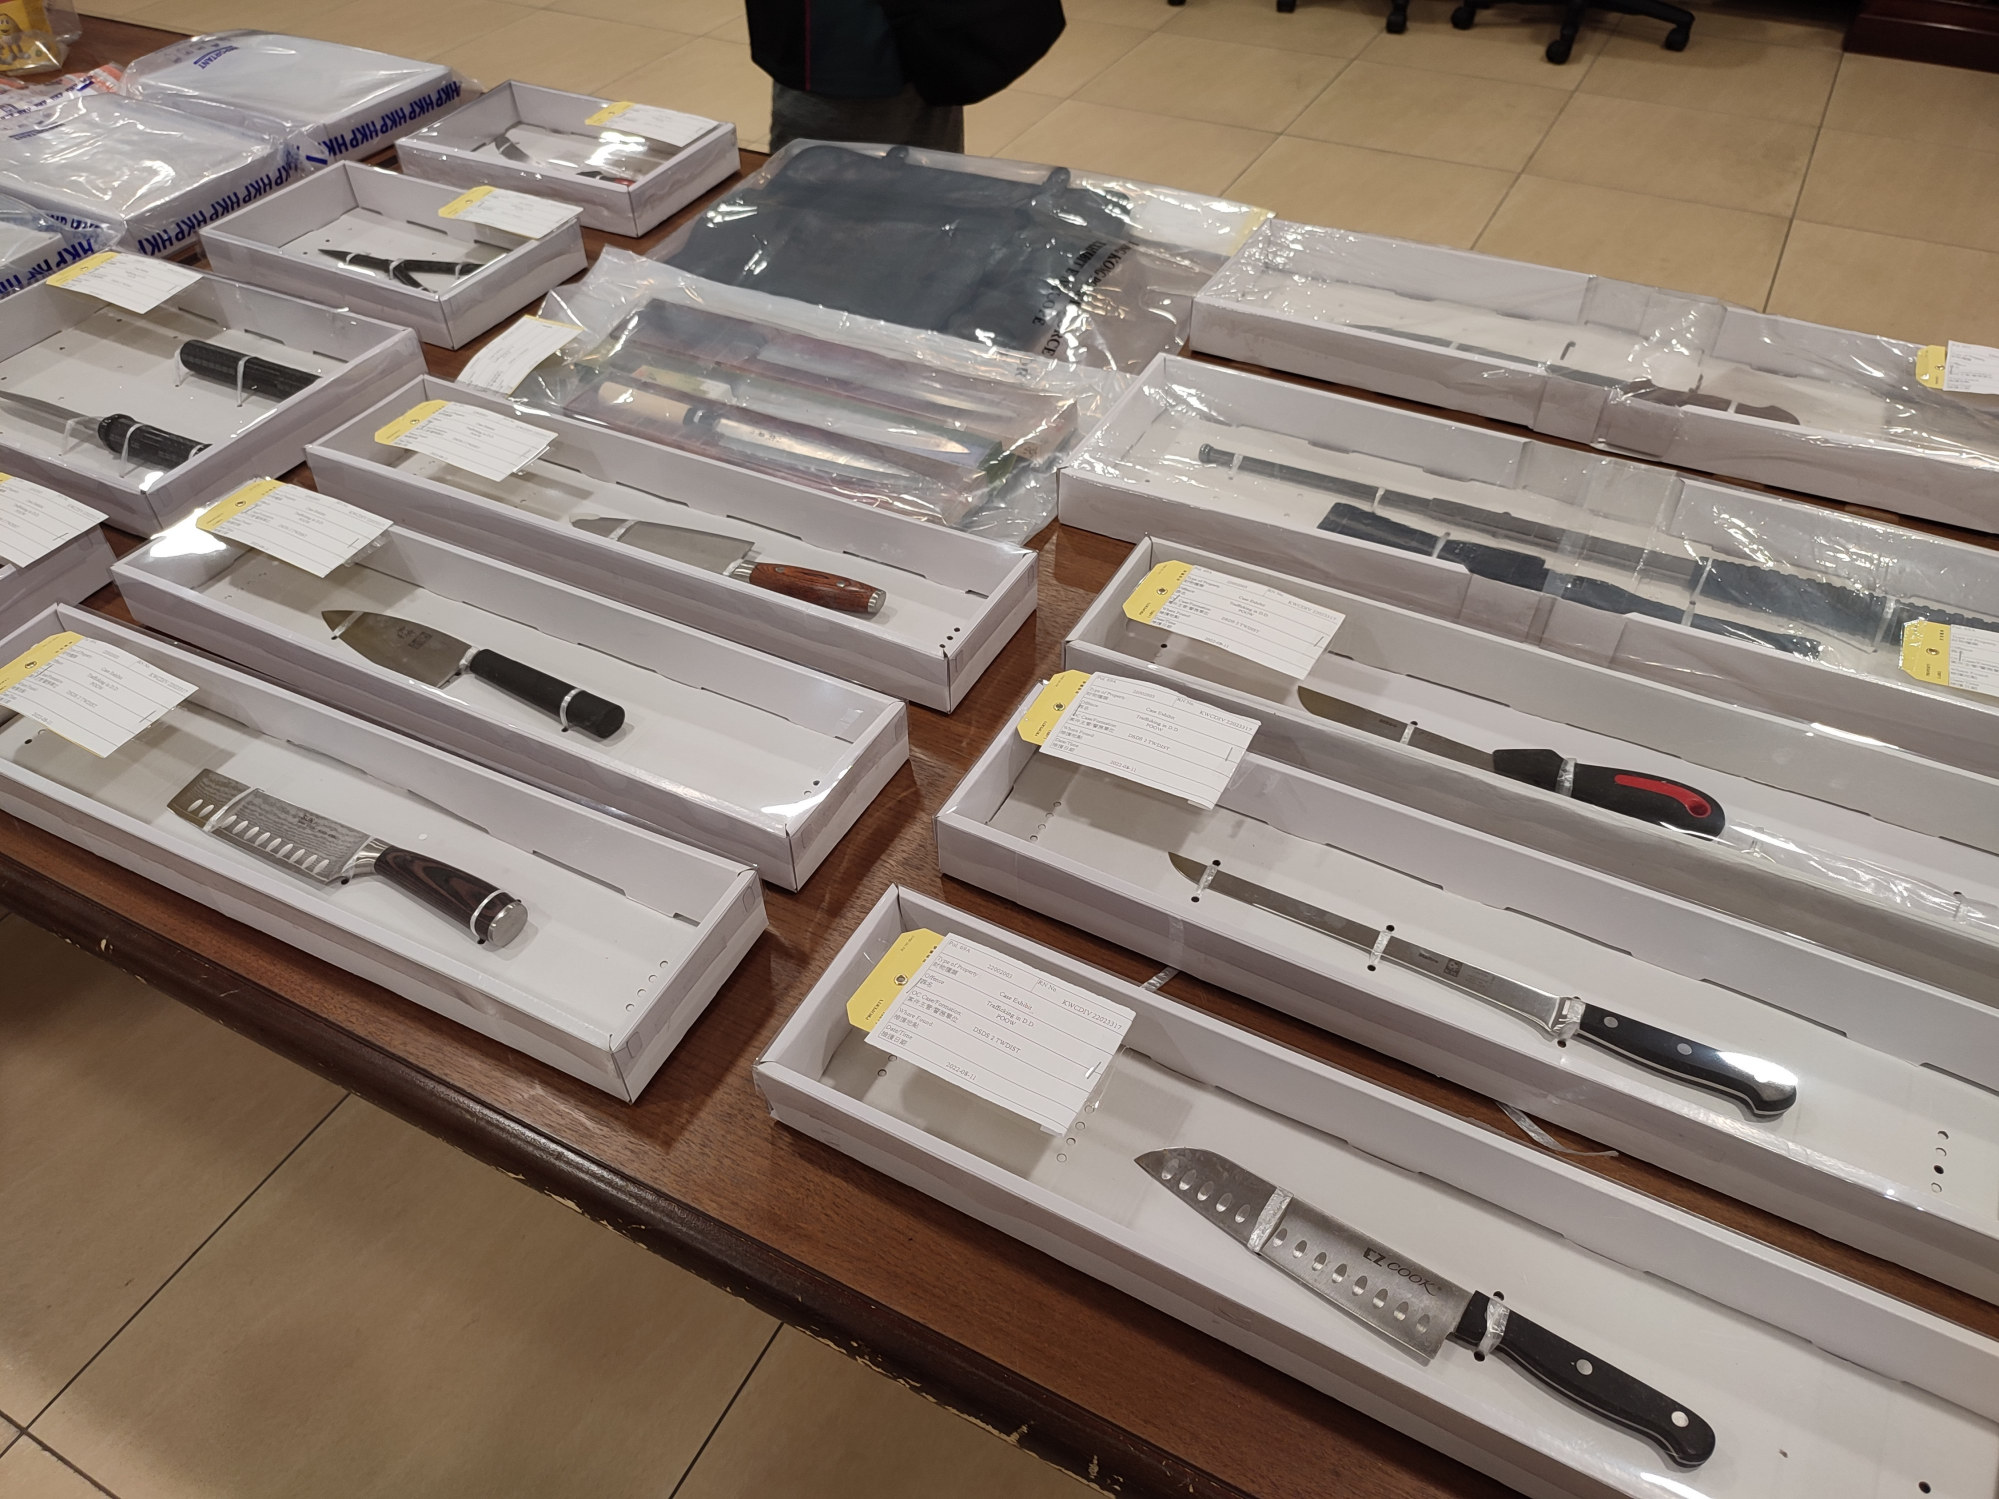 Weapons seized from a Kwai Chung public housing flat on Thursday. Photo: Handout